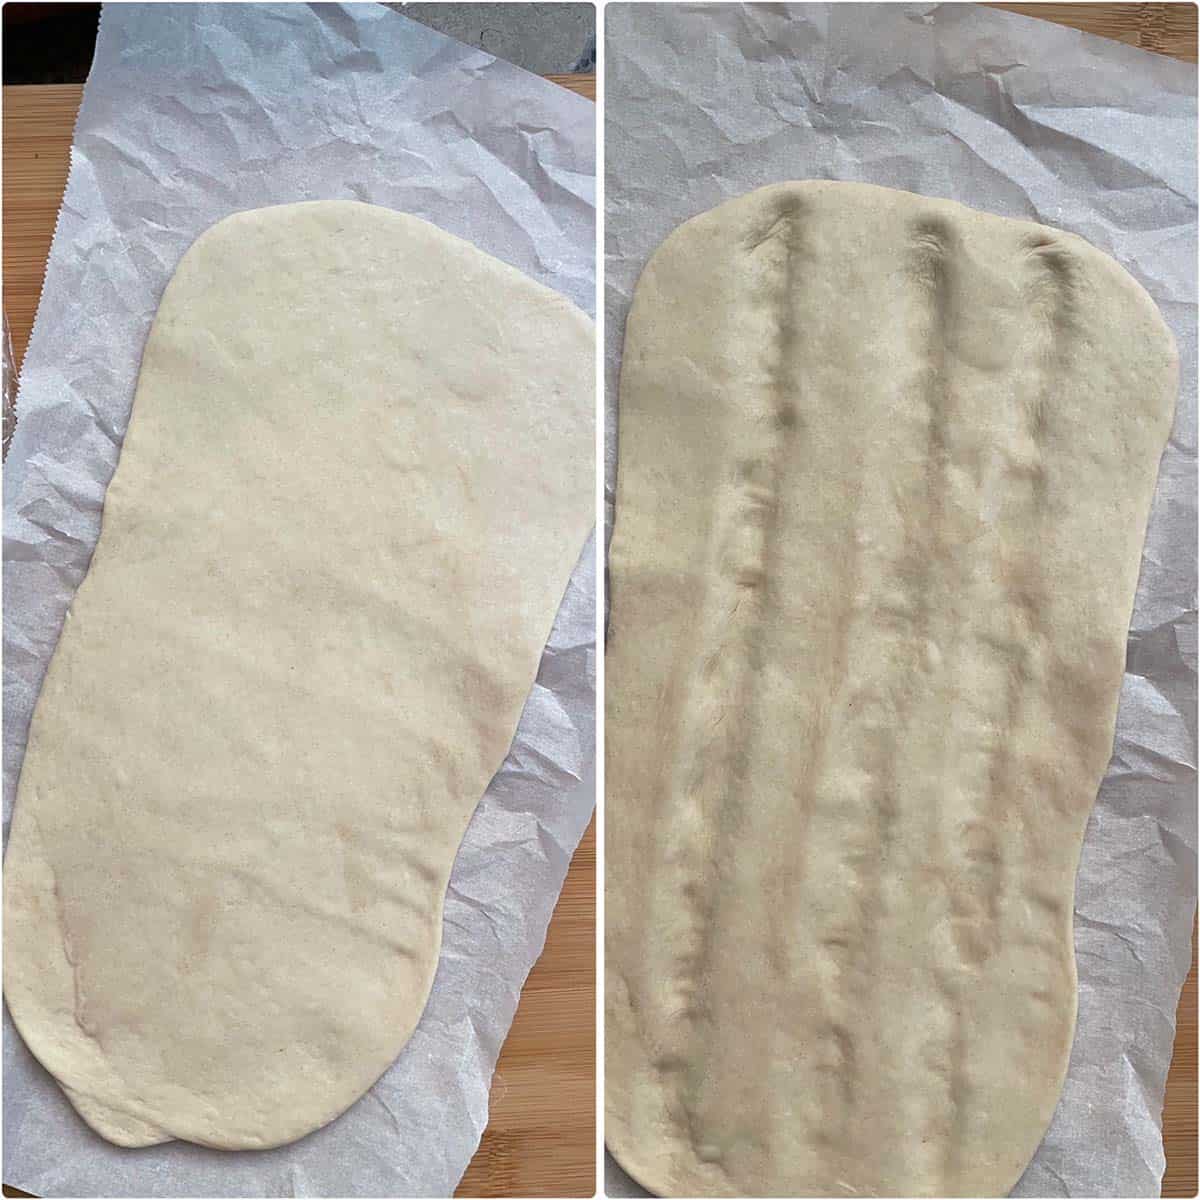 2 panel photo showing the shaping of the bread.